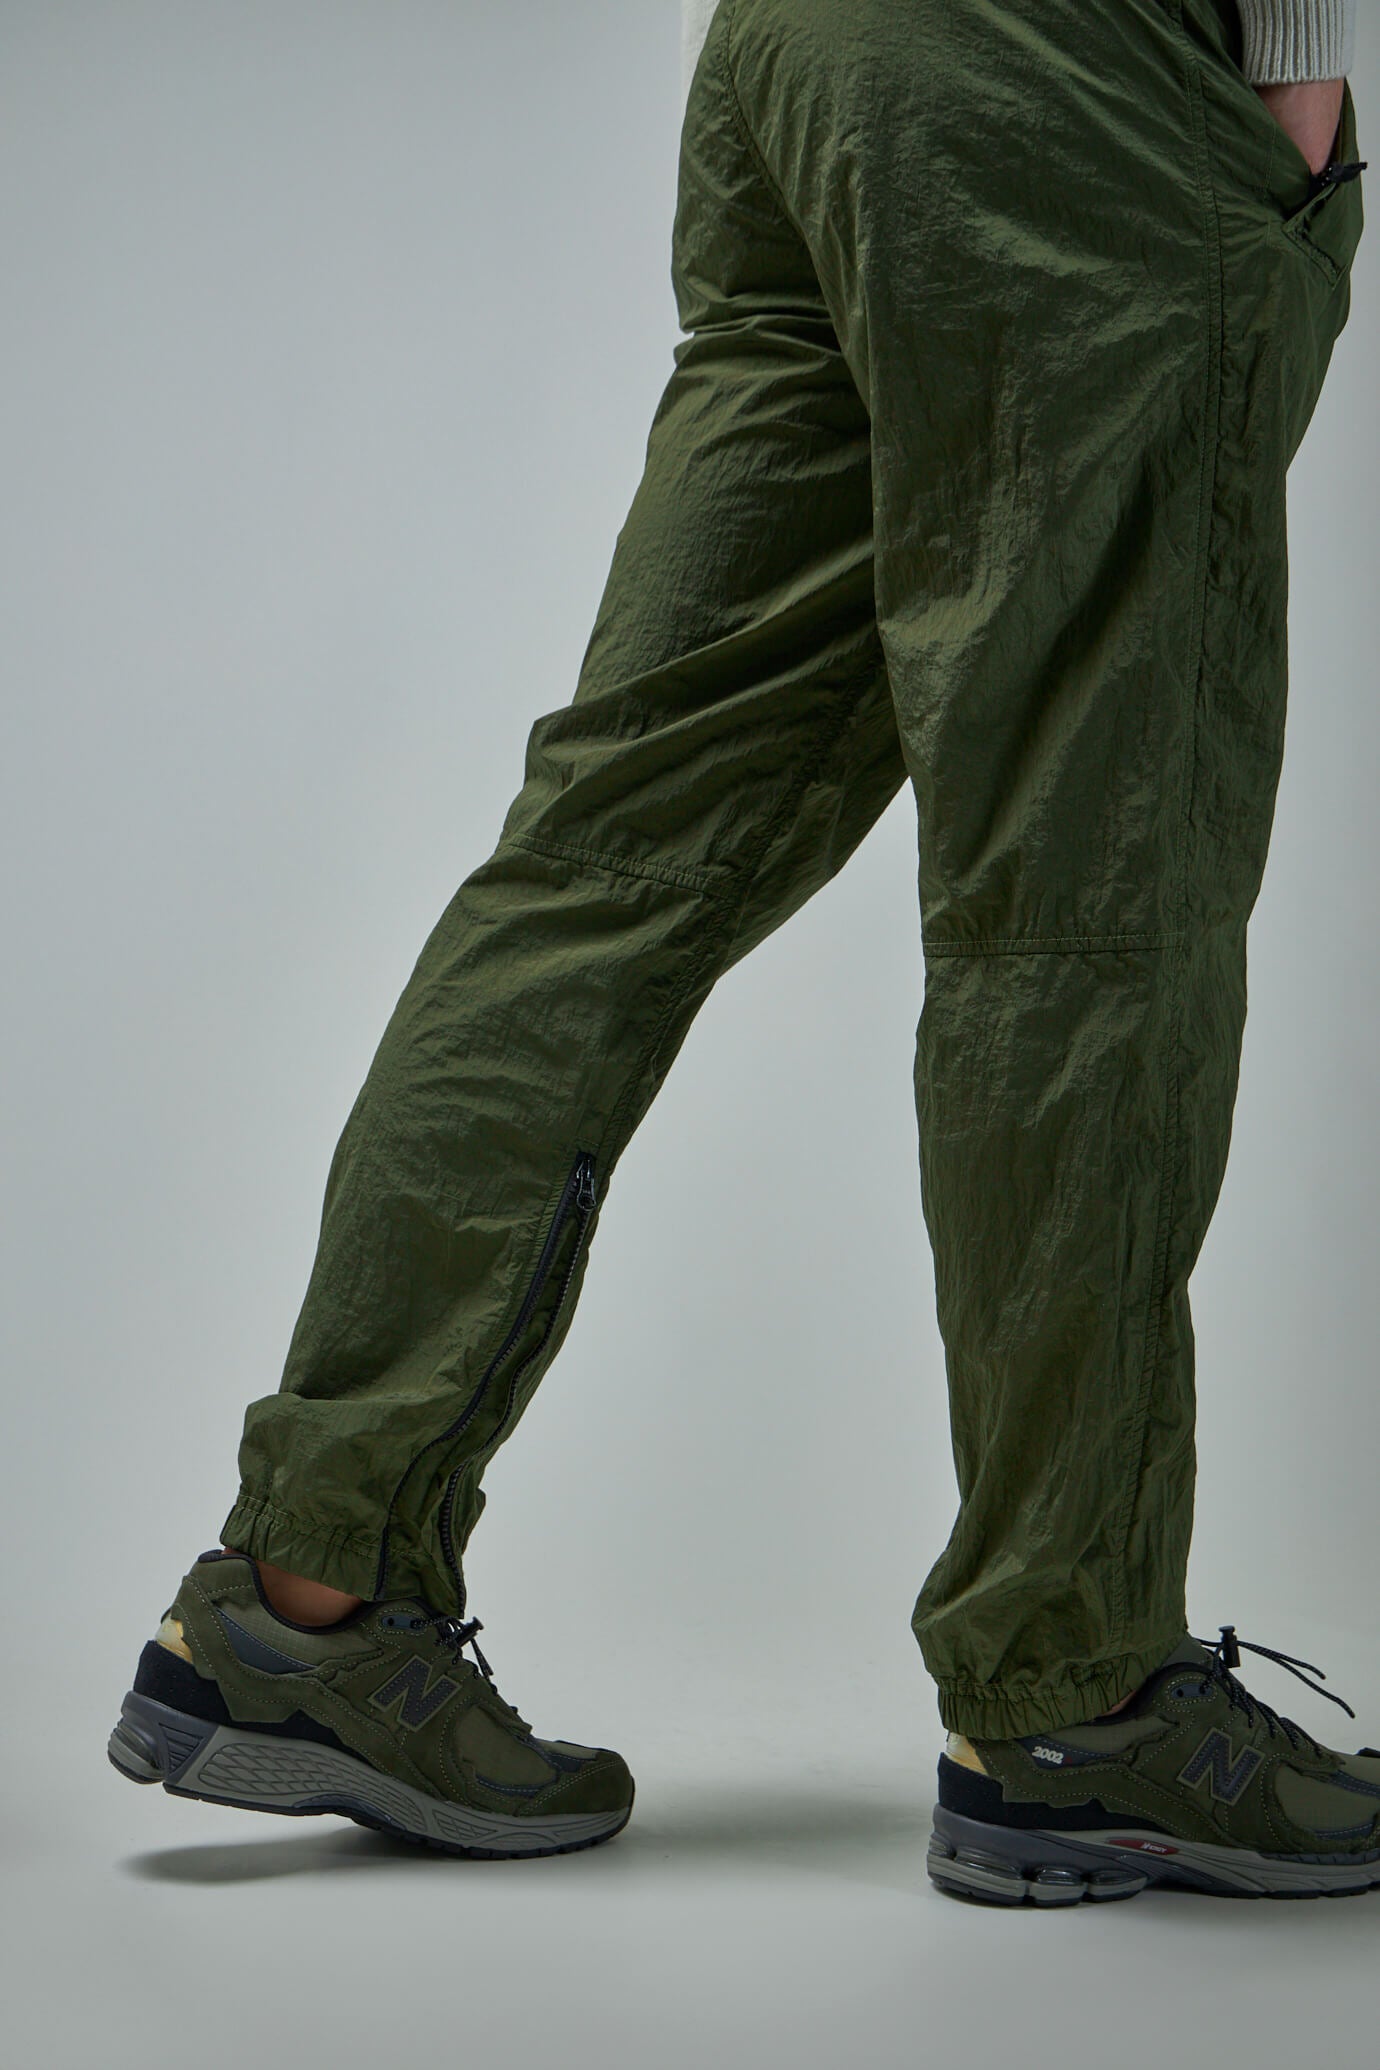 NEEDLES Track Pants Olive Size-L Used from Japan